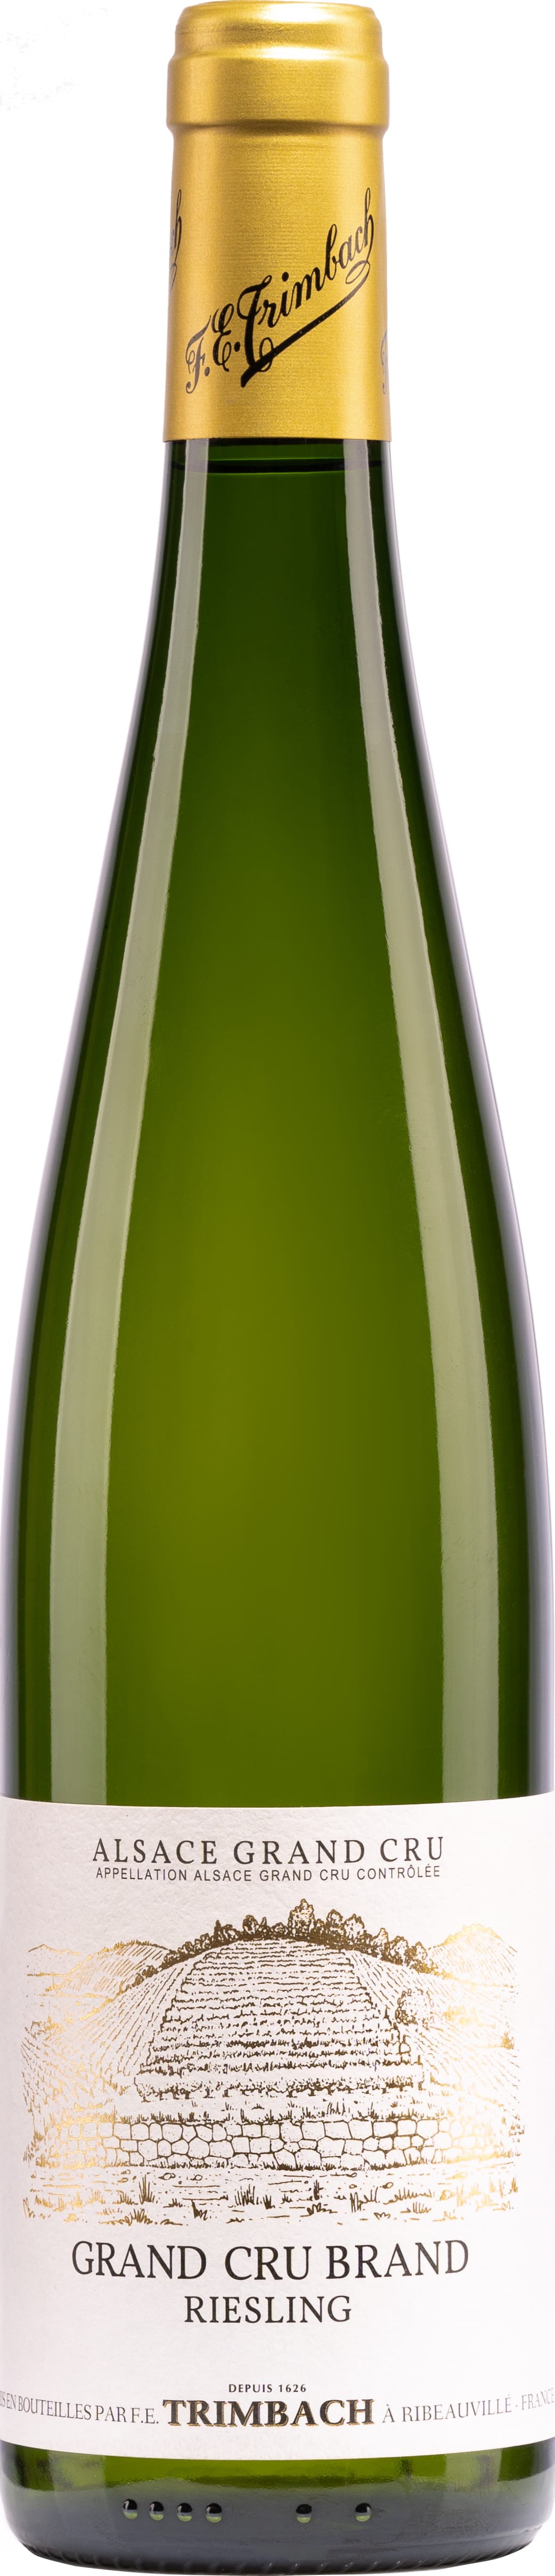 Trimbach Riesling Grand Cru Brand 2019 75cl - Buy Trimbach Wines from GREAT WINES DIRECT wine shop